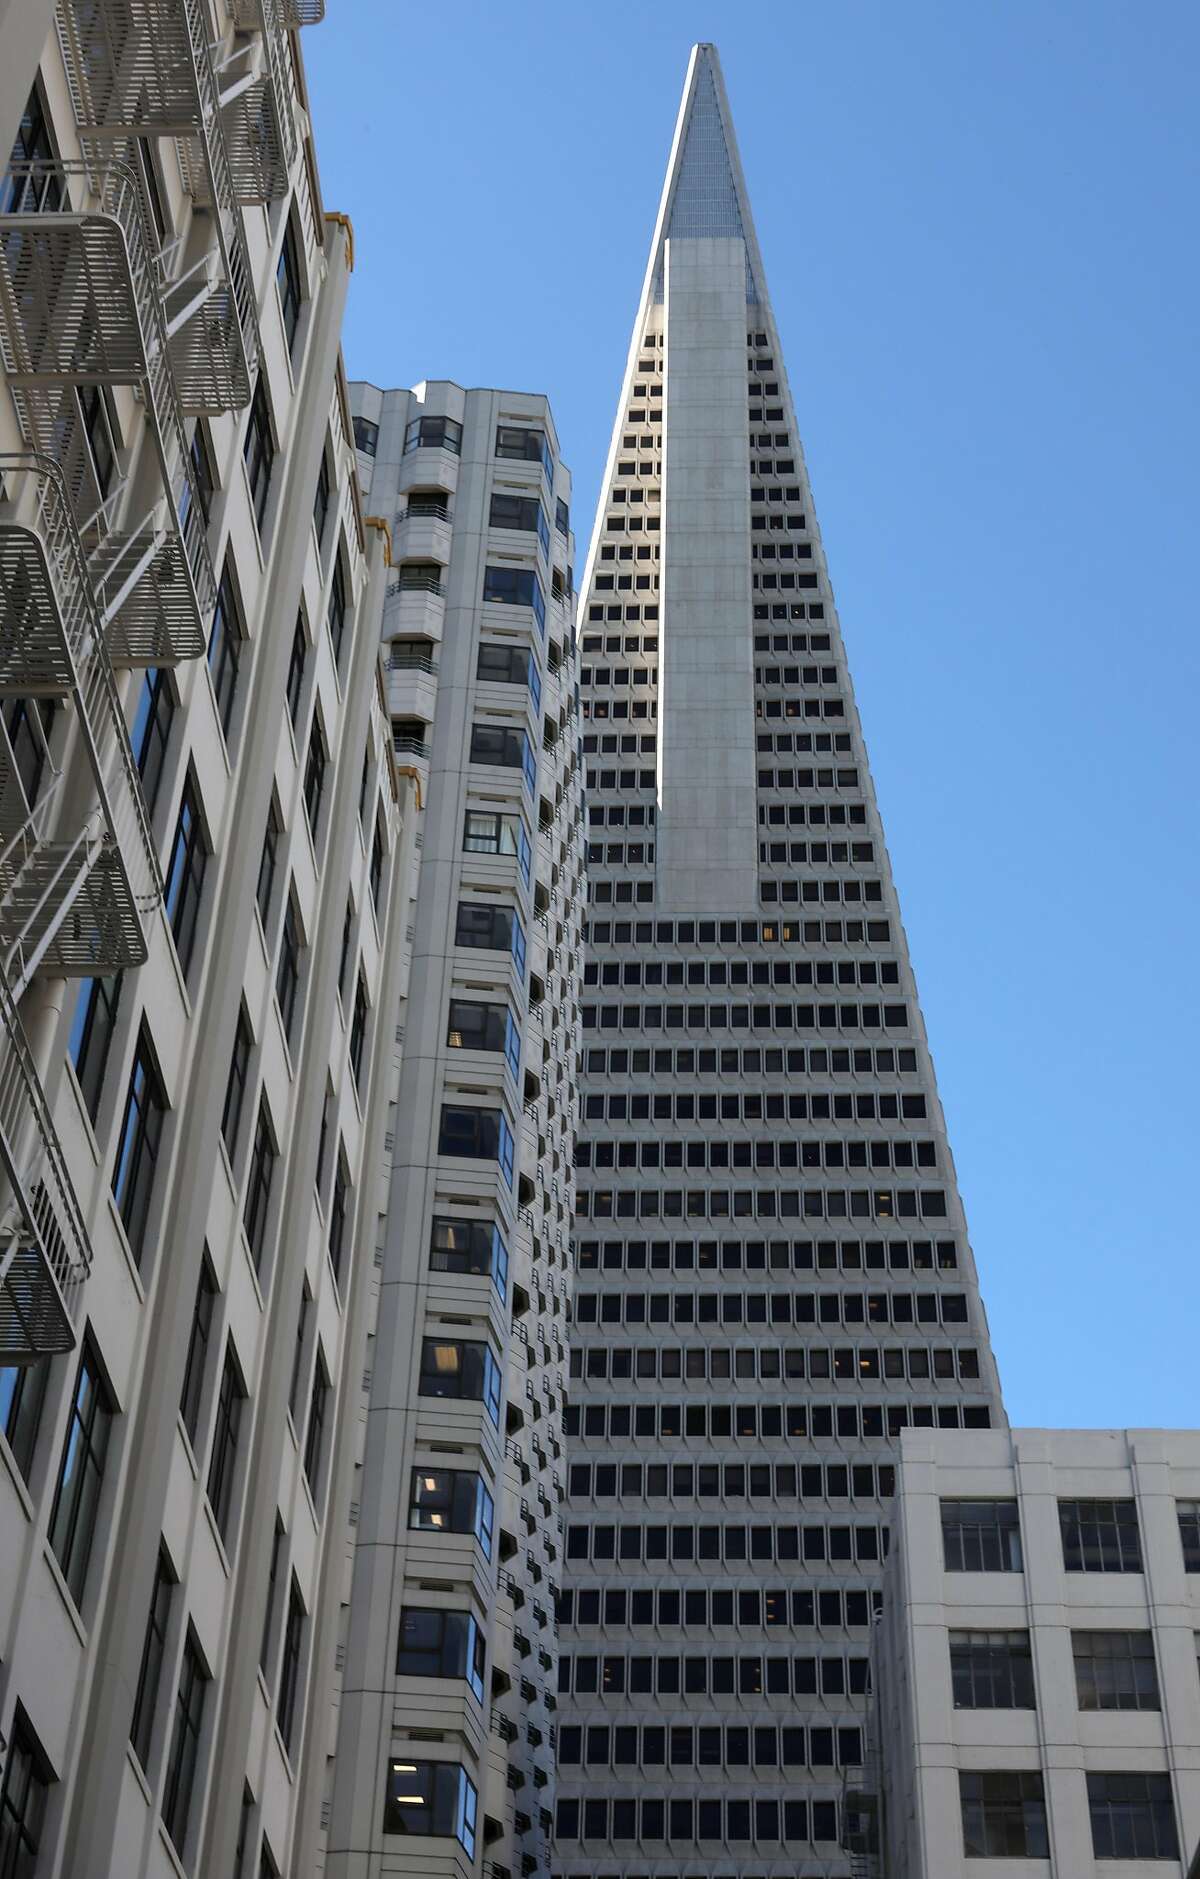 The Transamerica Pyramid (middle) with 505 Sansome St. (left of pyramid) and 545 Sansome St. (lower right of pyramid) are nearing a sale on Monday, Feb. 3, 2020, in San Francisco, Calif.